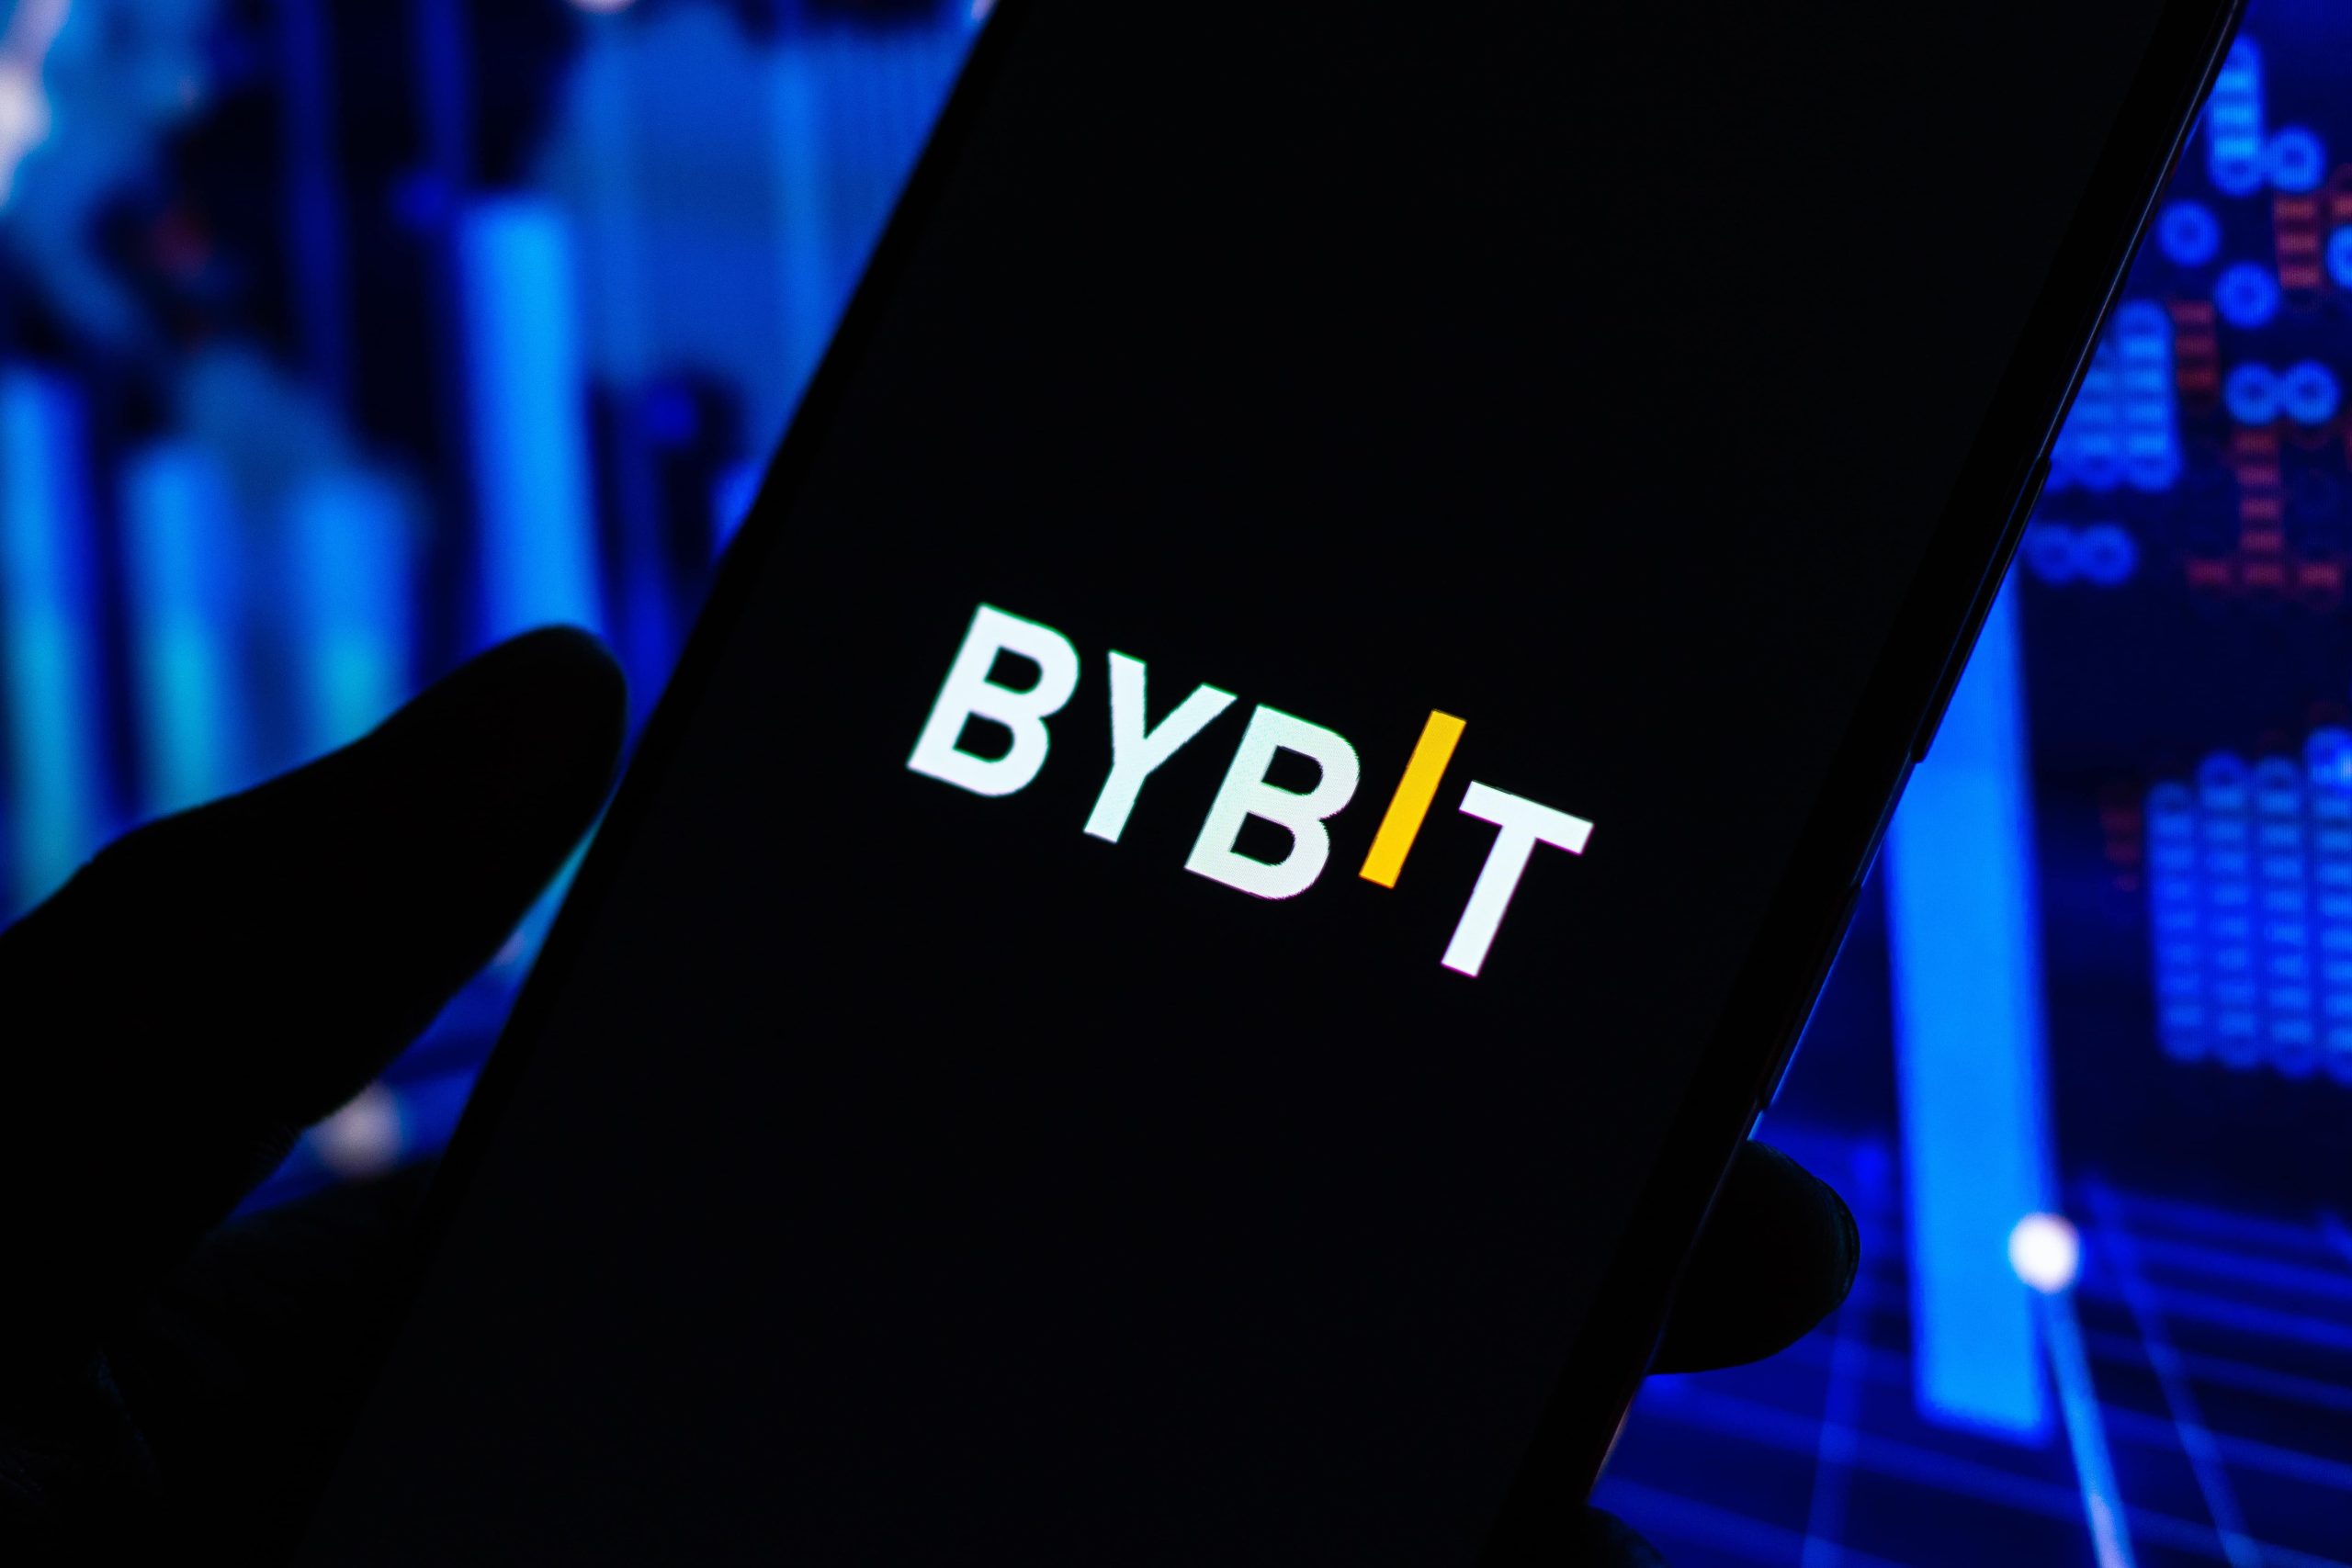 Bybit to Lay Off 30% of Workforce Amid Worsening Crypto Winter